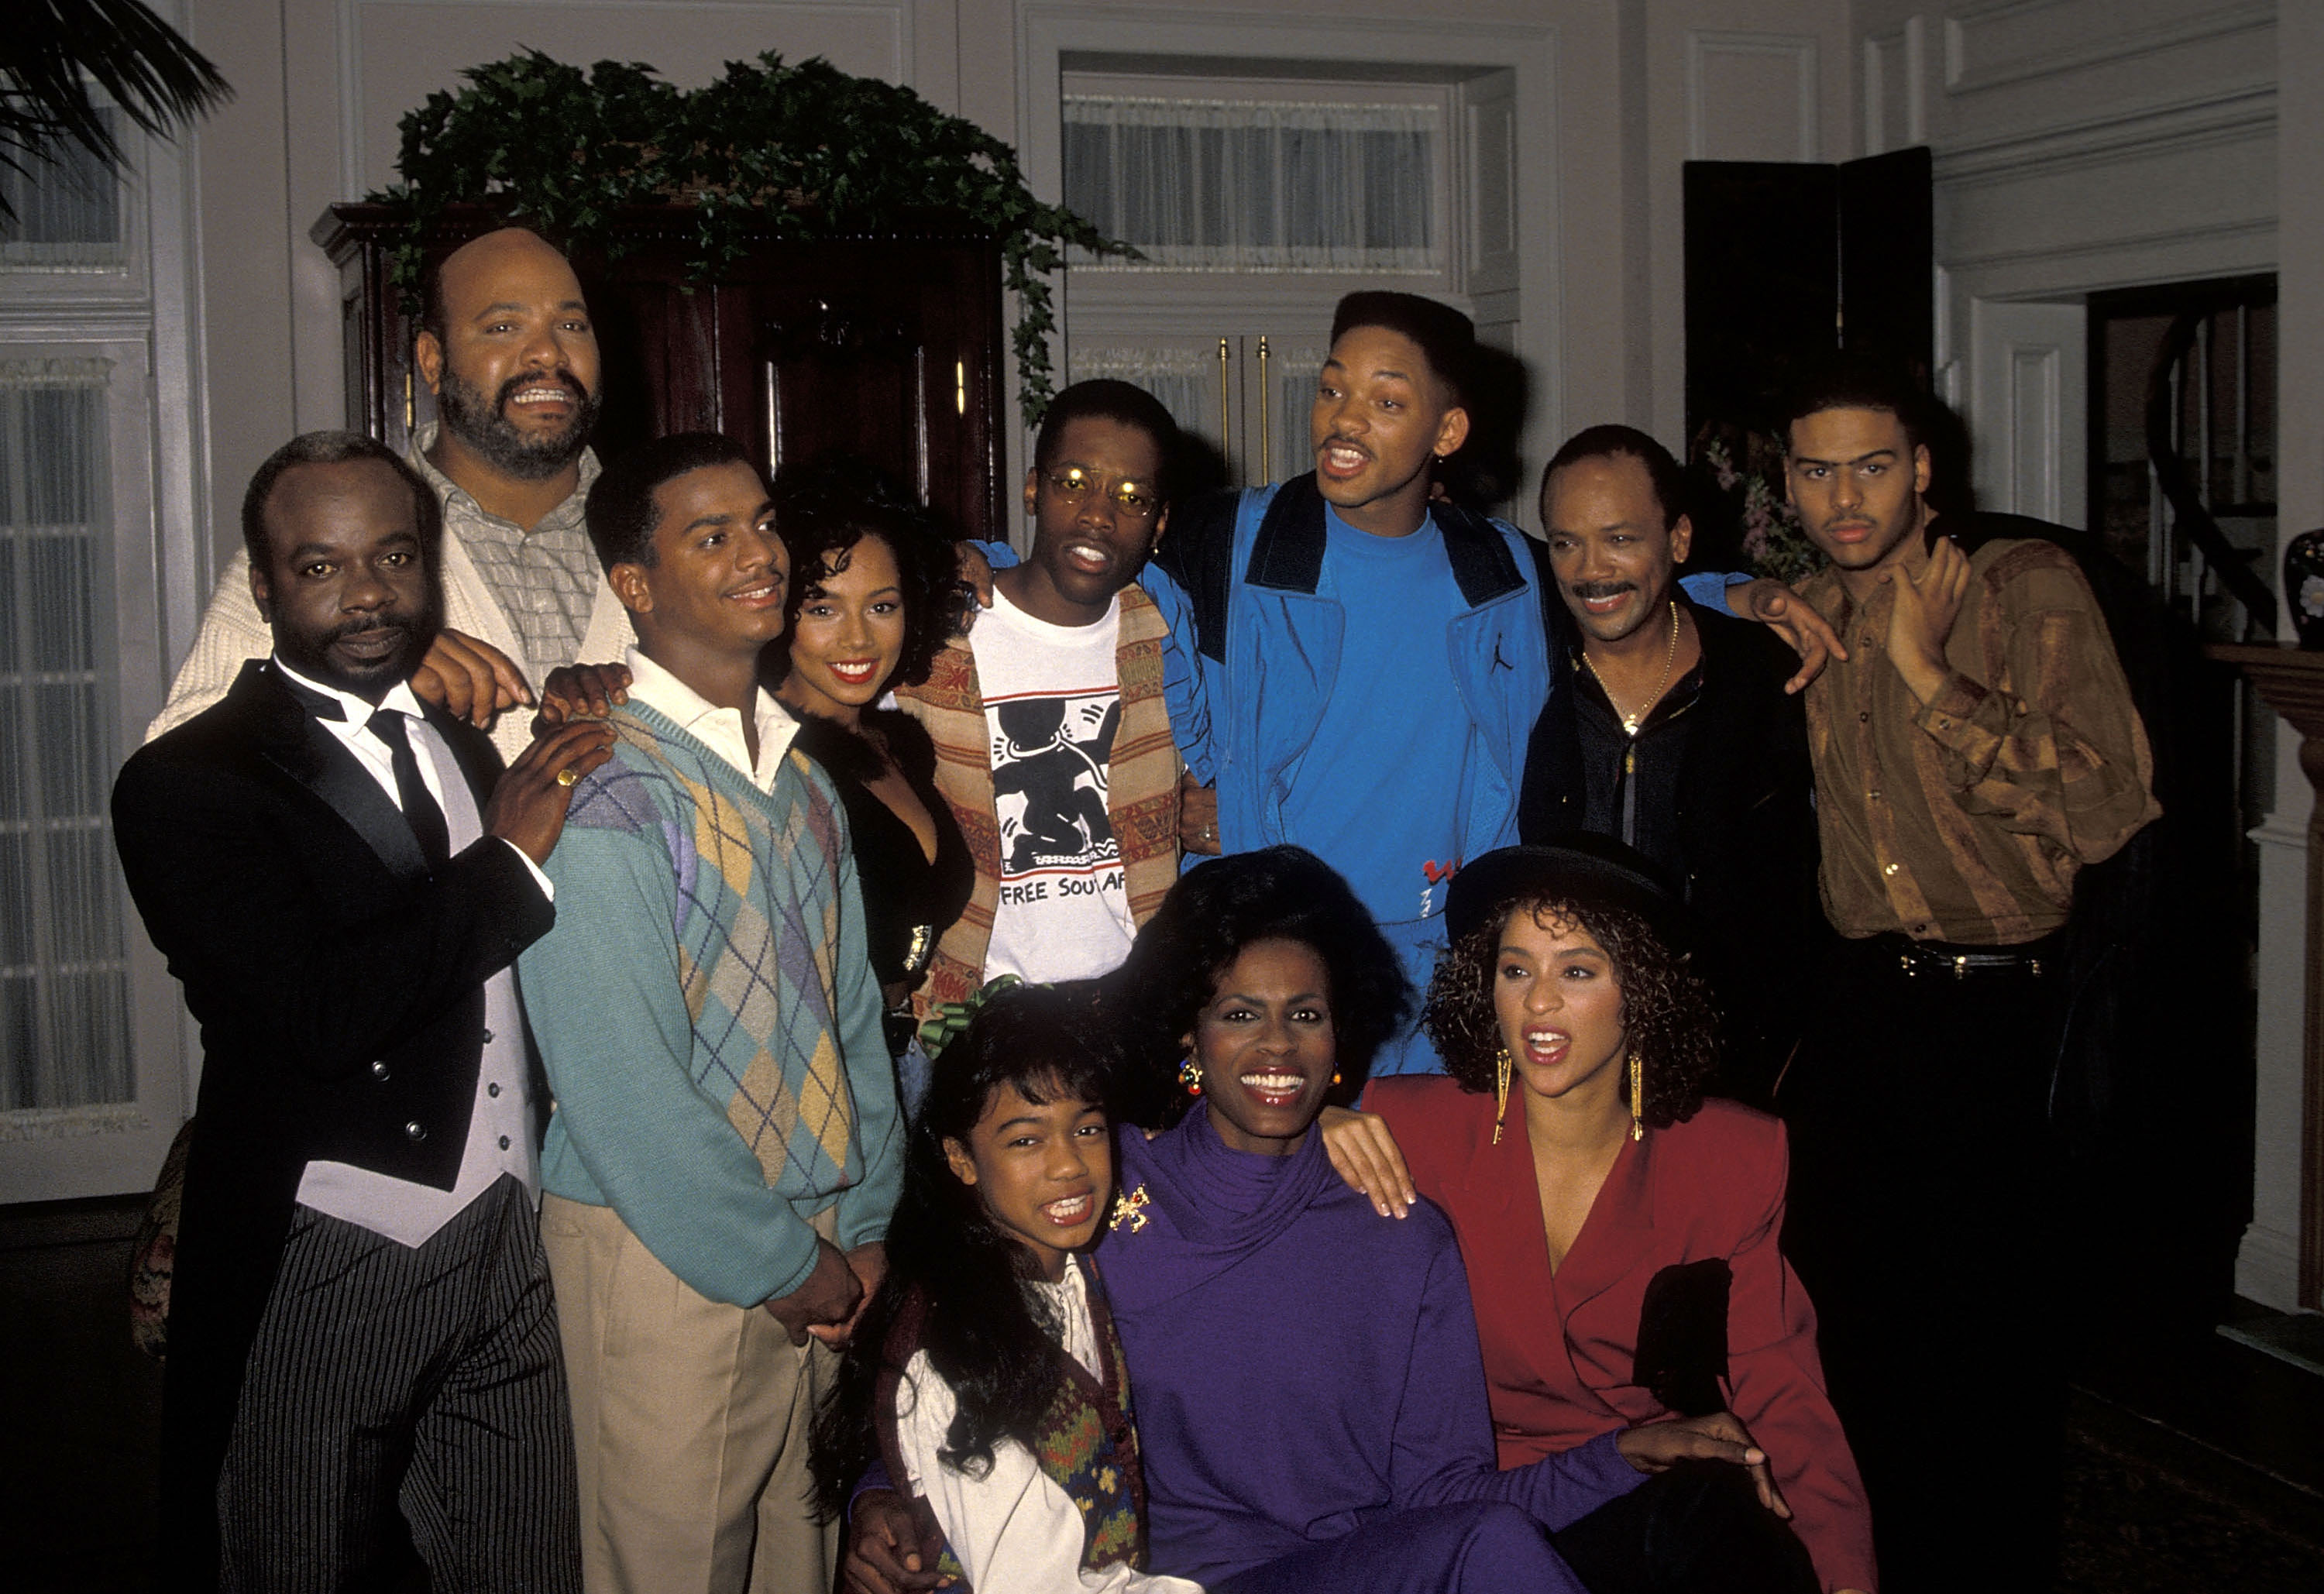 The cast of Fresh Prince of Bel Air